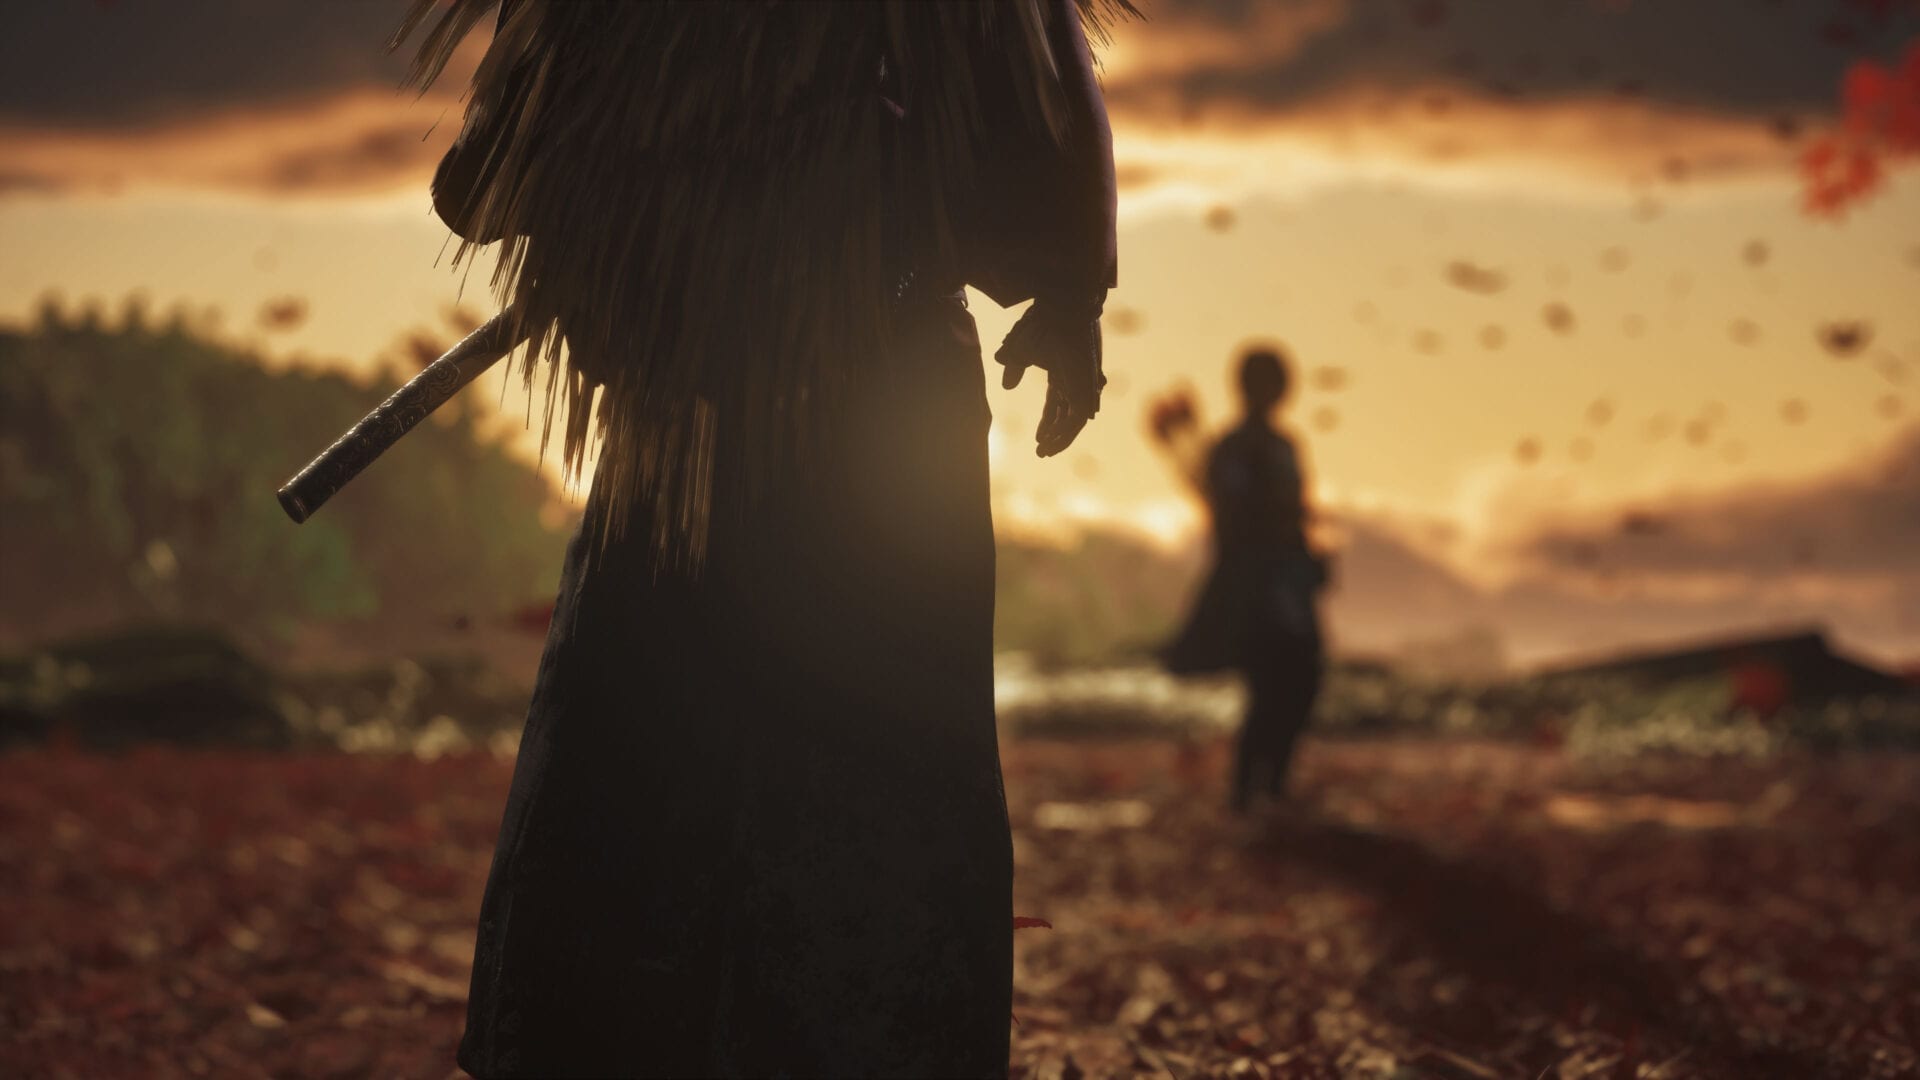 ghost of tsushima trophies